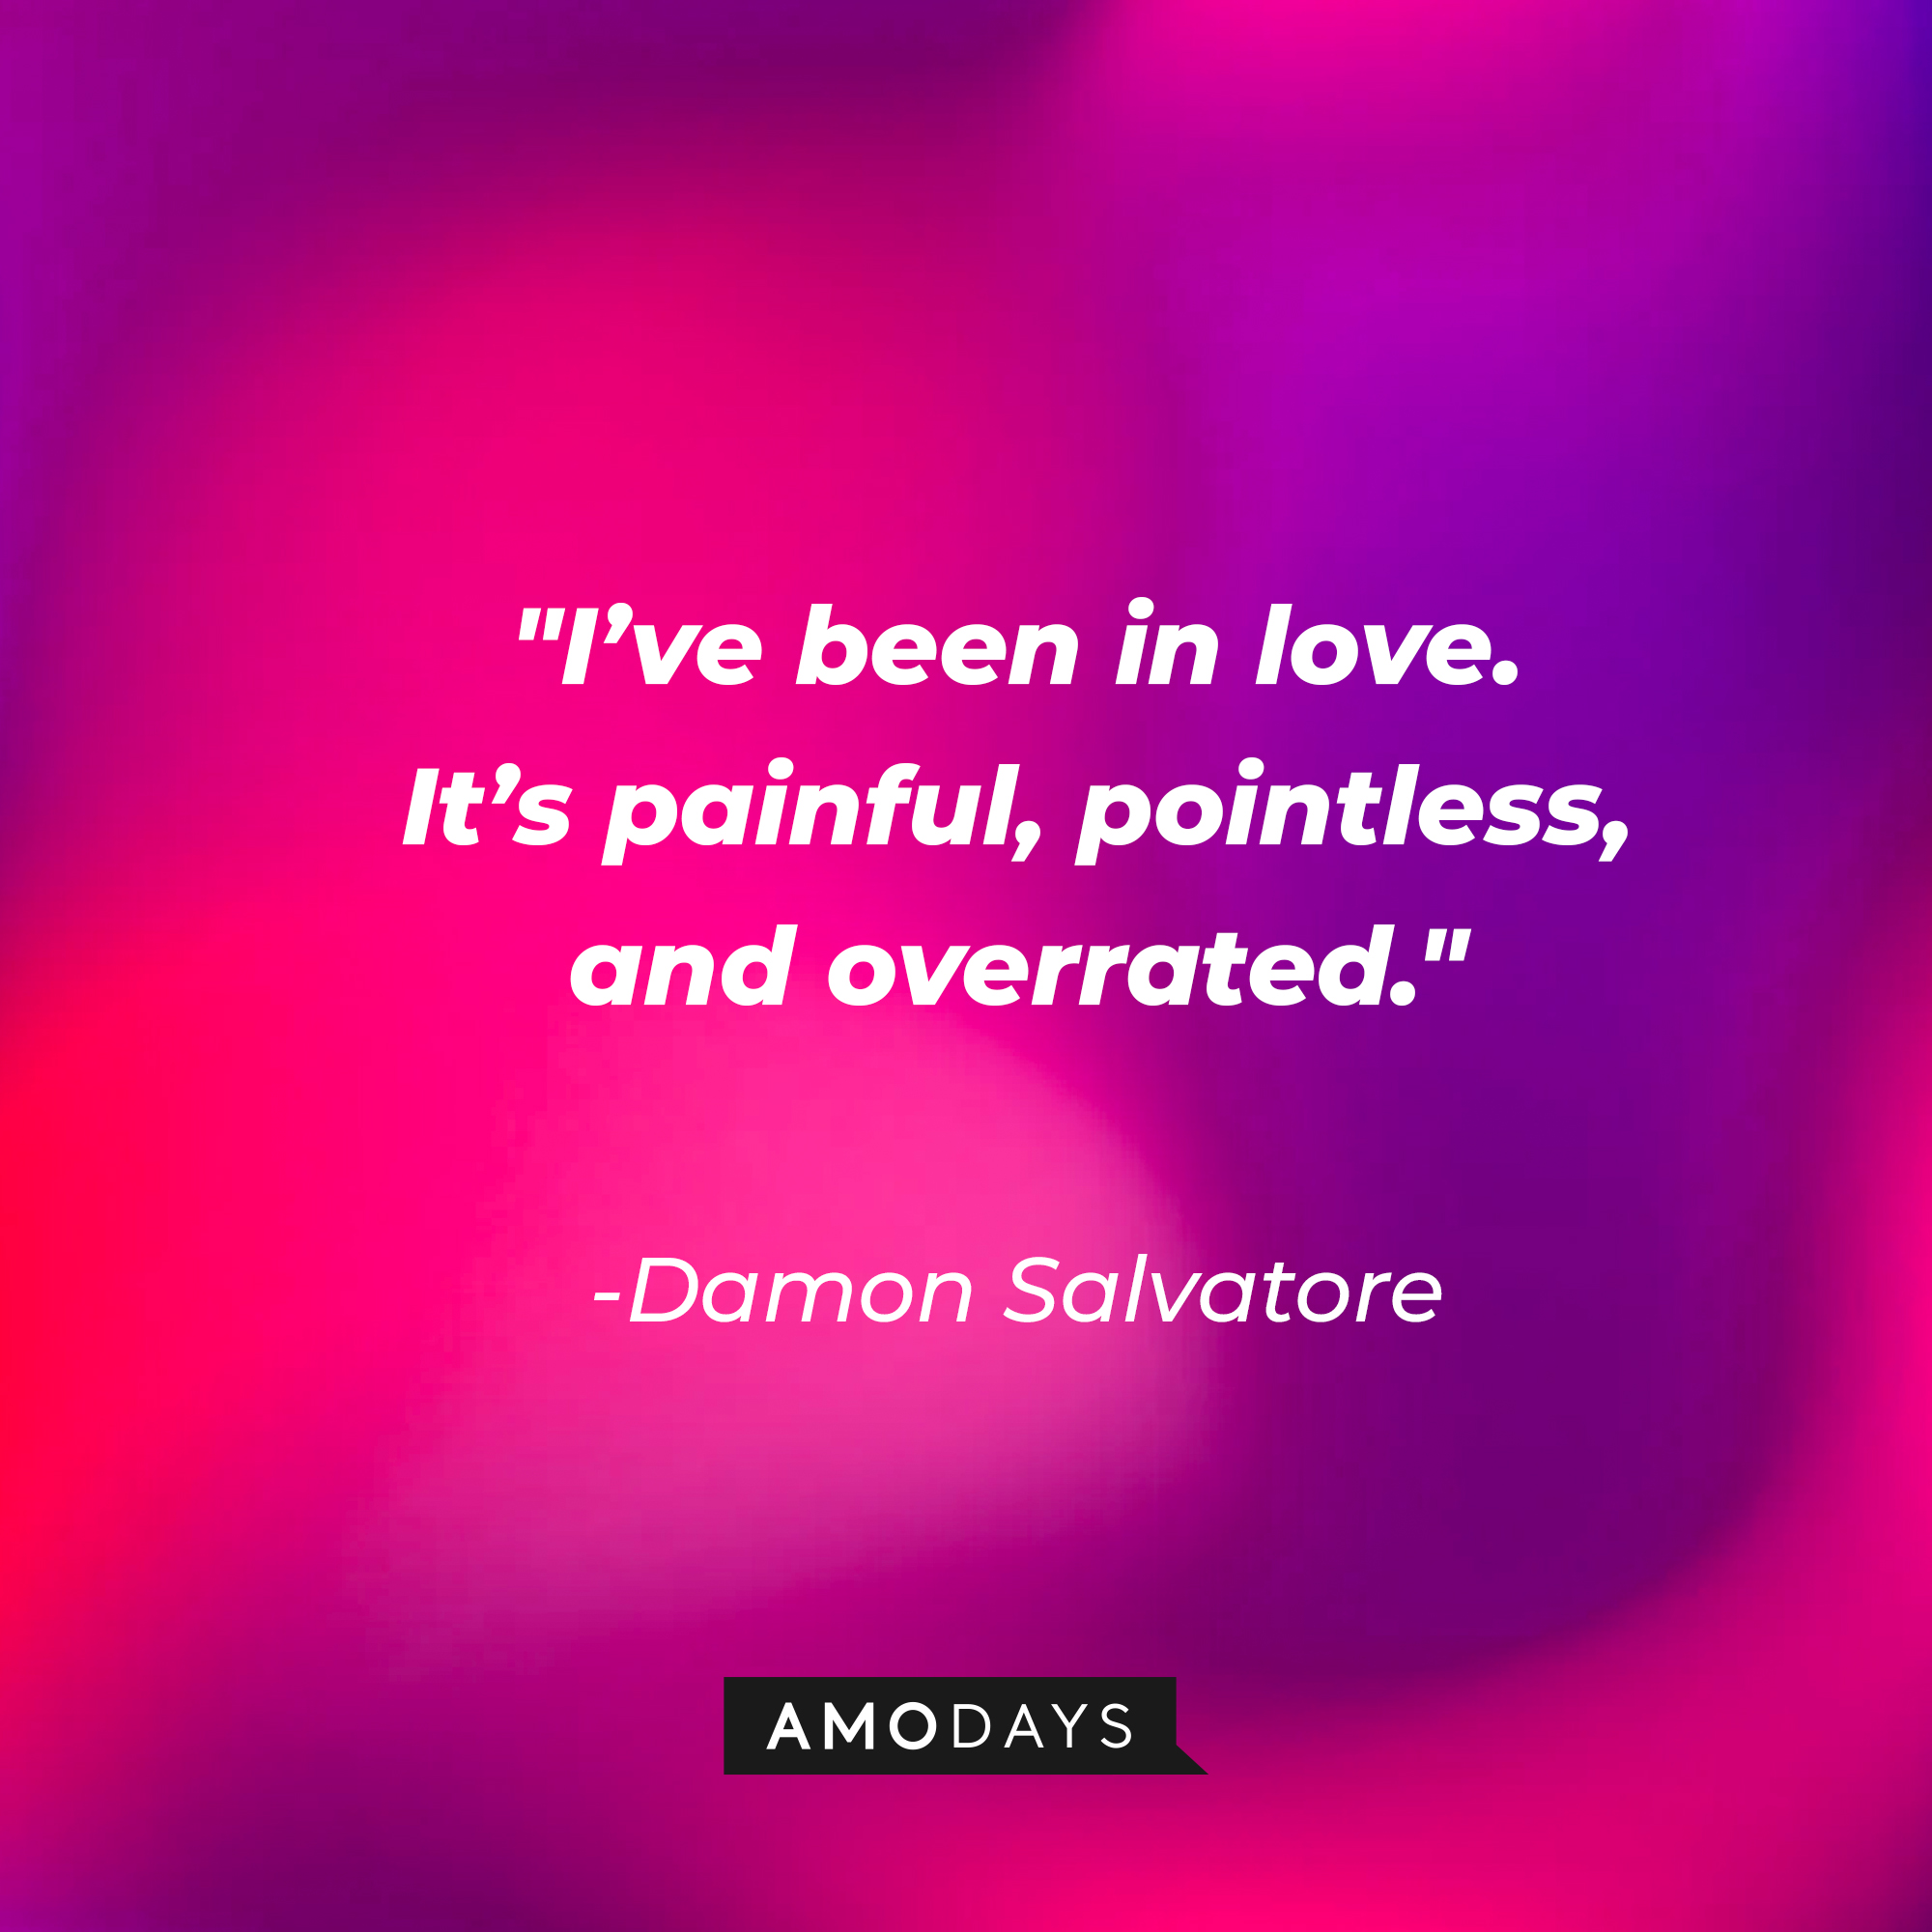 Damon Salvatore's quote: "I've been in love. It's painful, pointless, and overrated." | Source: Amodays